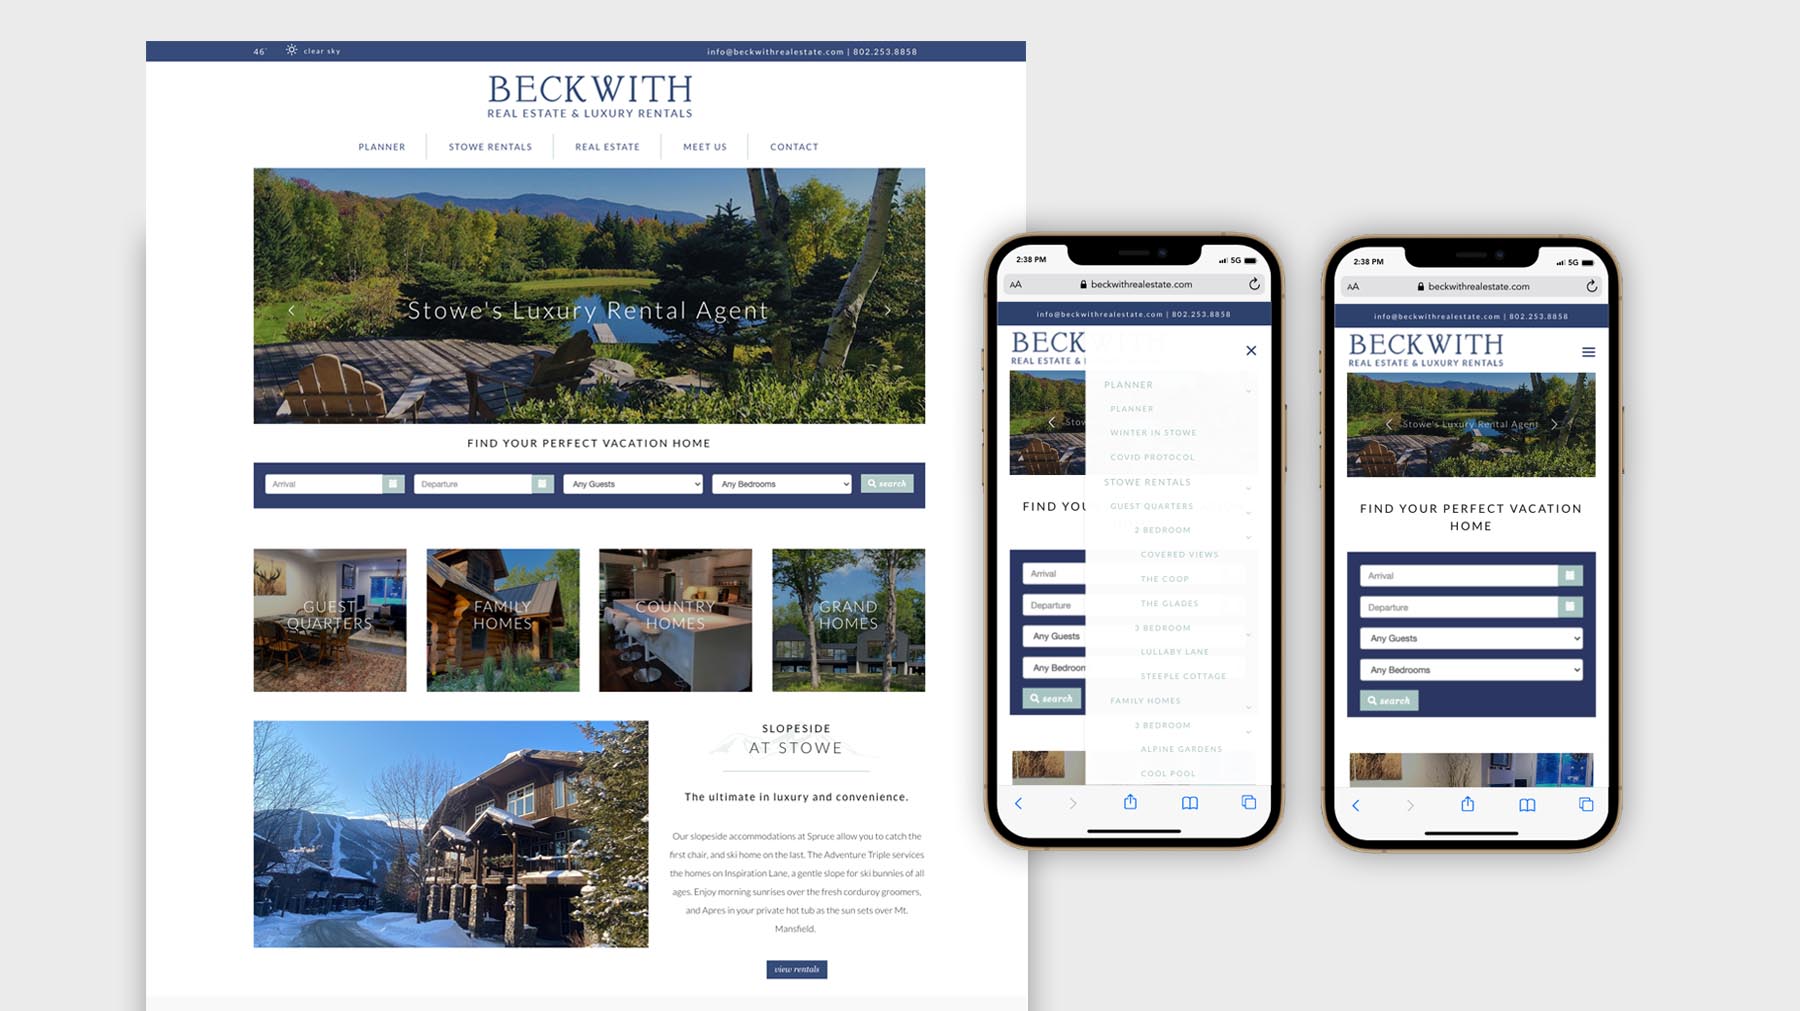 Beckwith Real Estate & Luxury Rentals